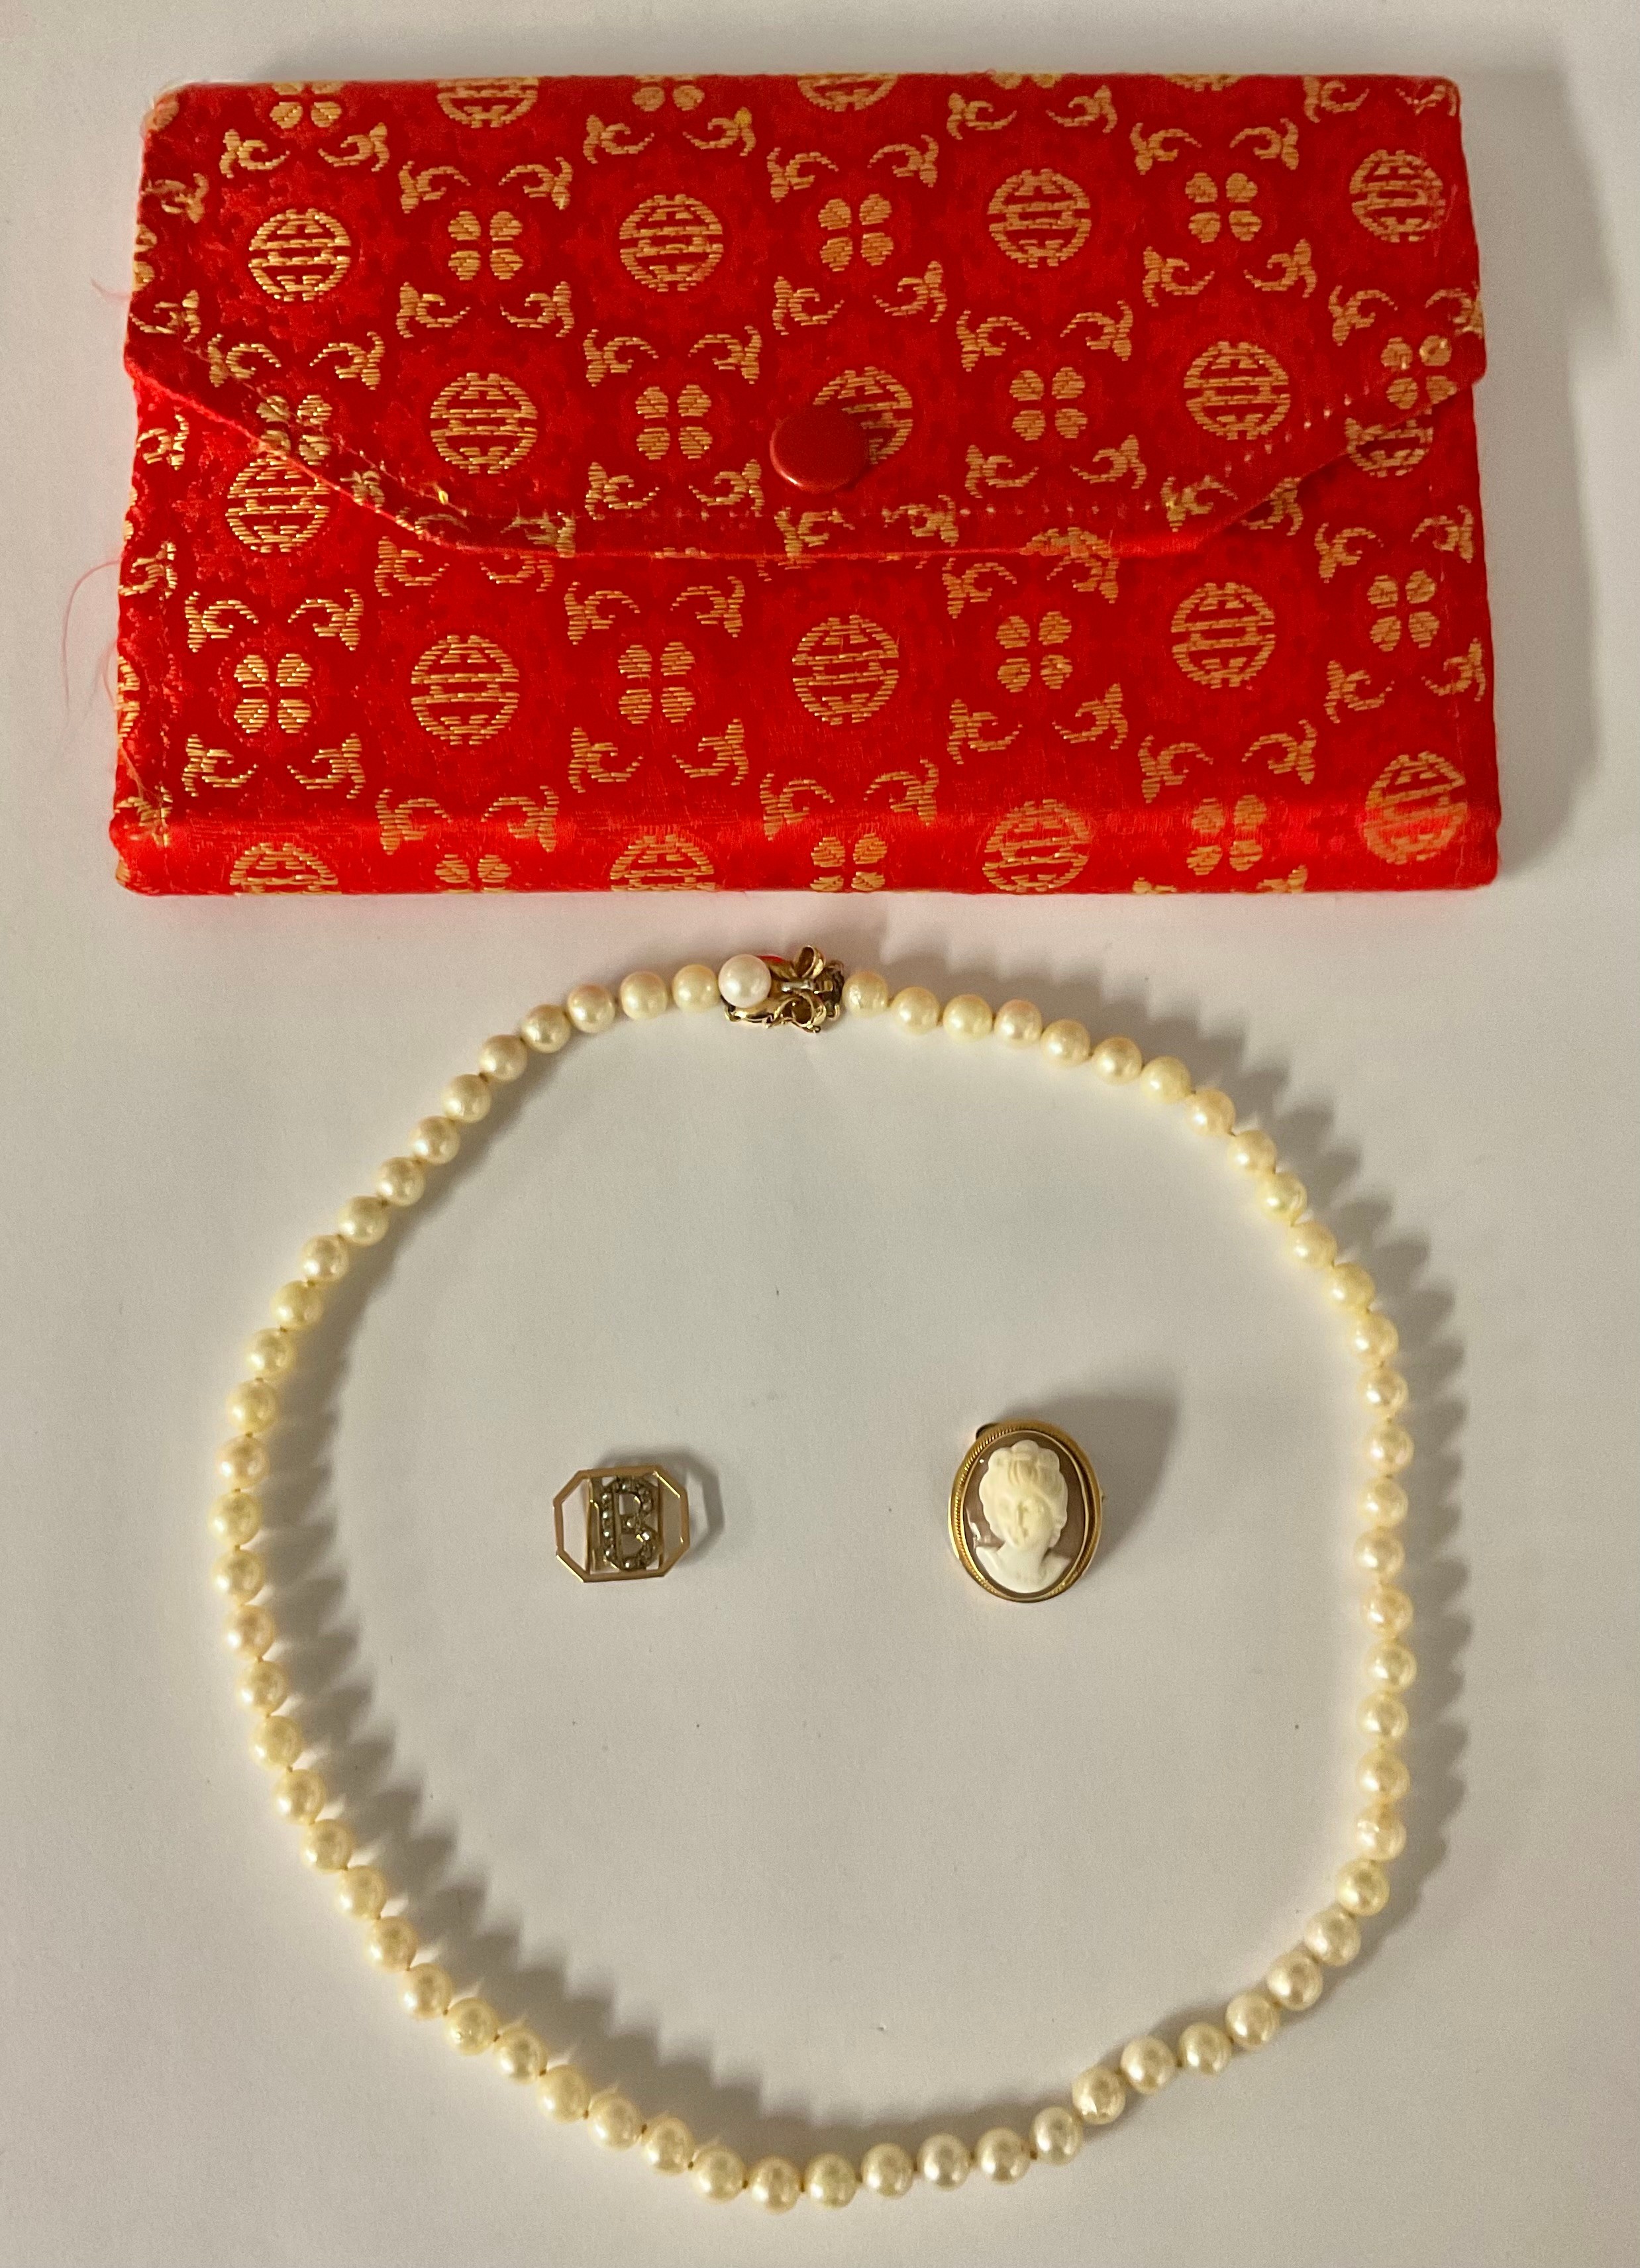 A single strand of cultured pearls, 14k gold clasp, marked 585, made in China, with red pouch; an